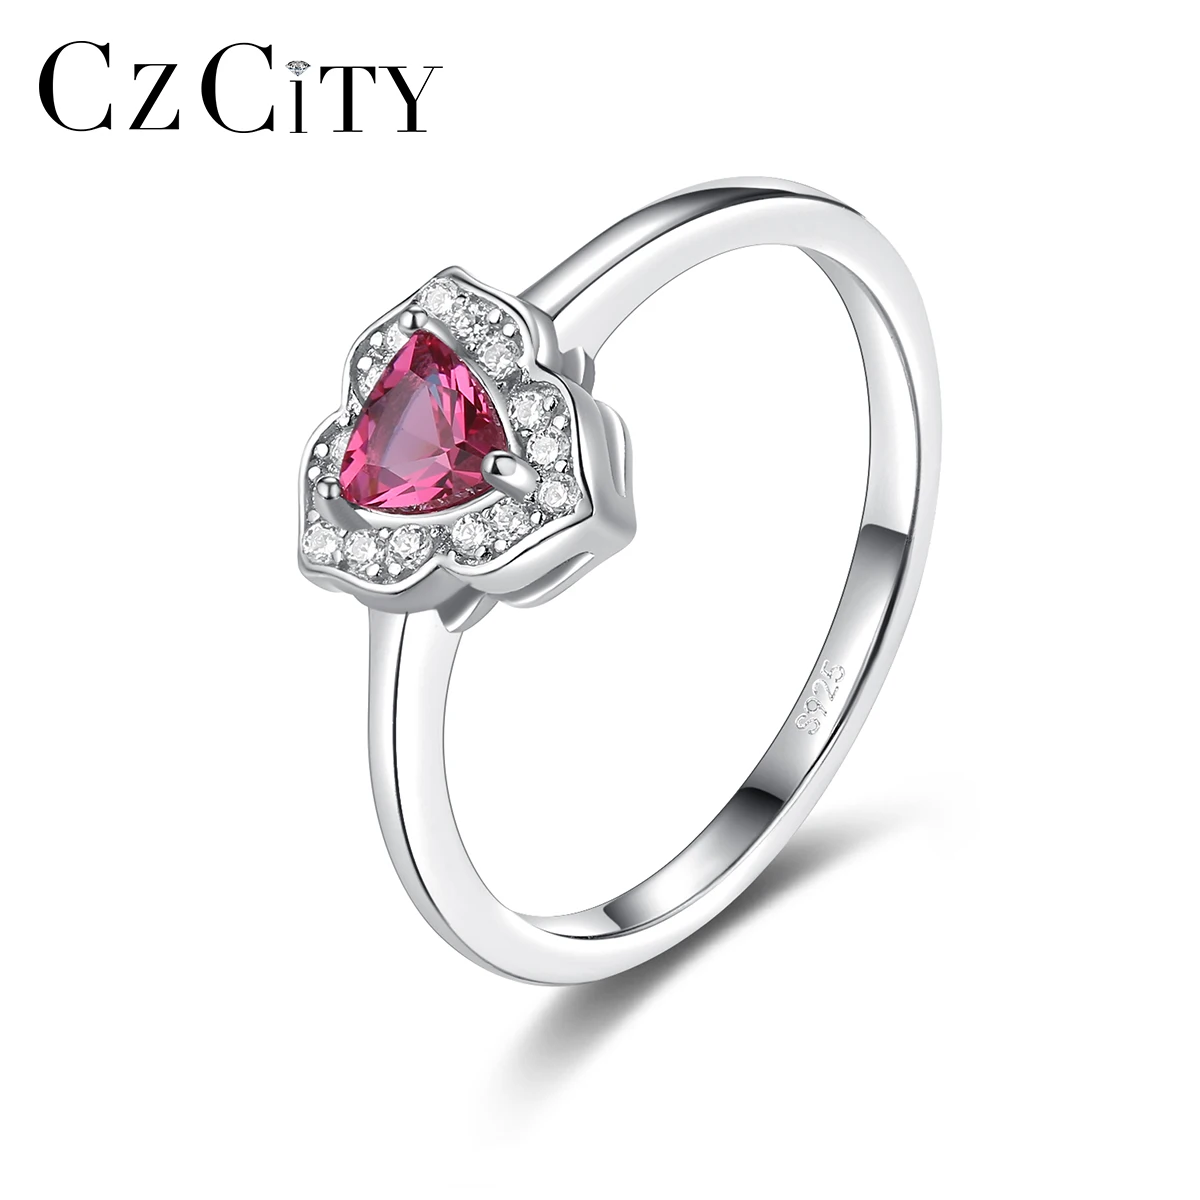 

CZCITY New Design Diamond Gemstone Sterling Silver Ring 925 Silver Jewelry Red Ruby Rings